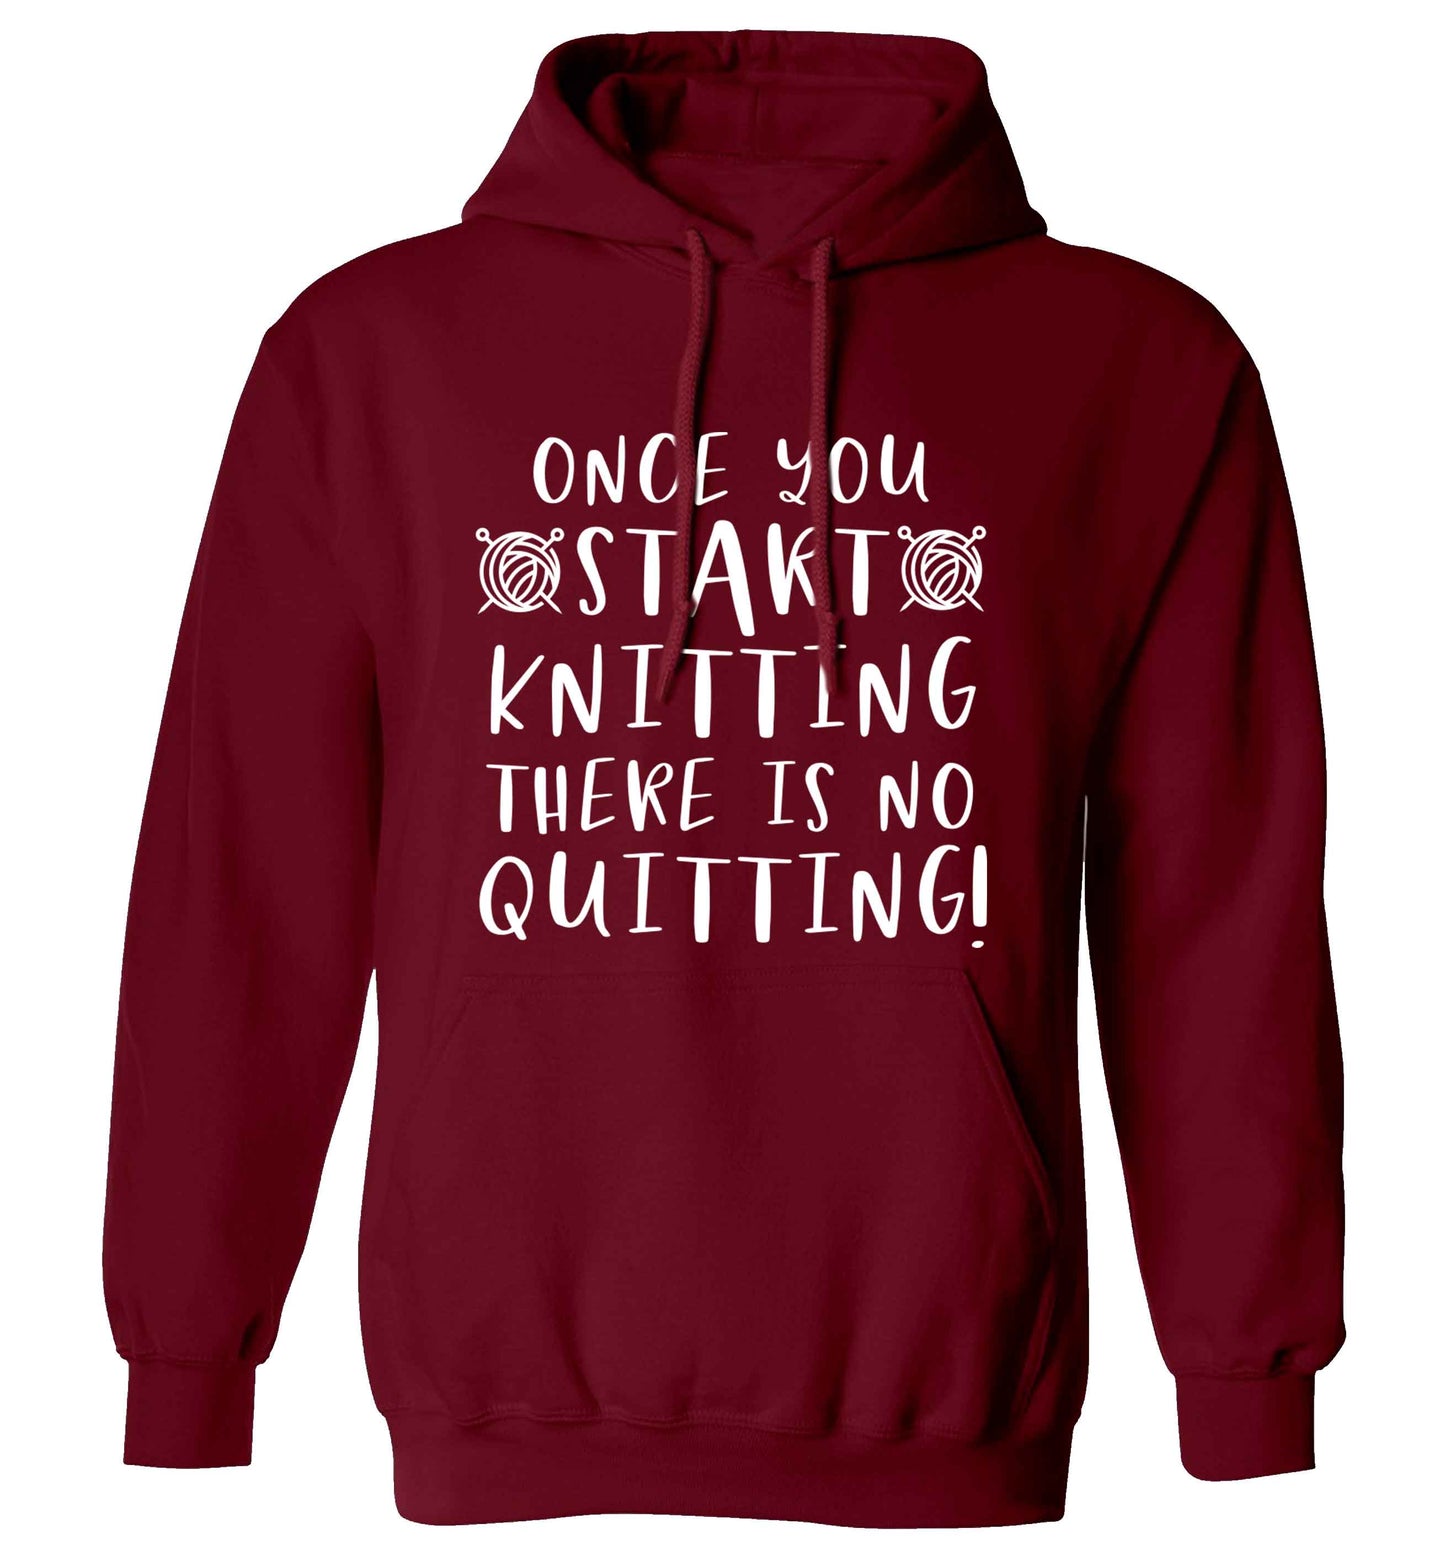 Once you start knitting there is no quitting! adults unisex maroon hoodie 2XL